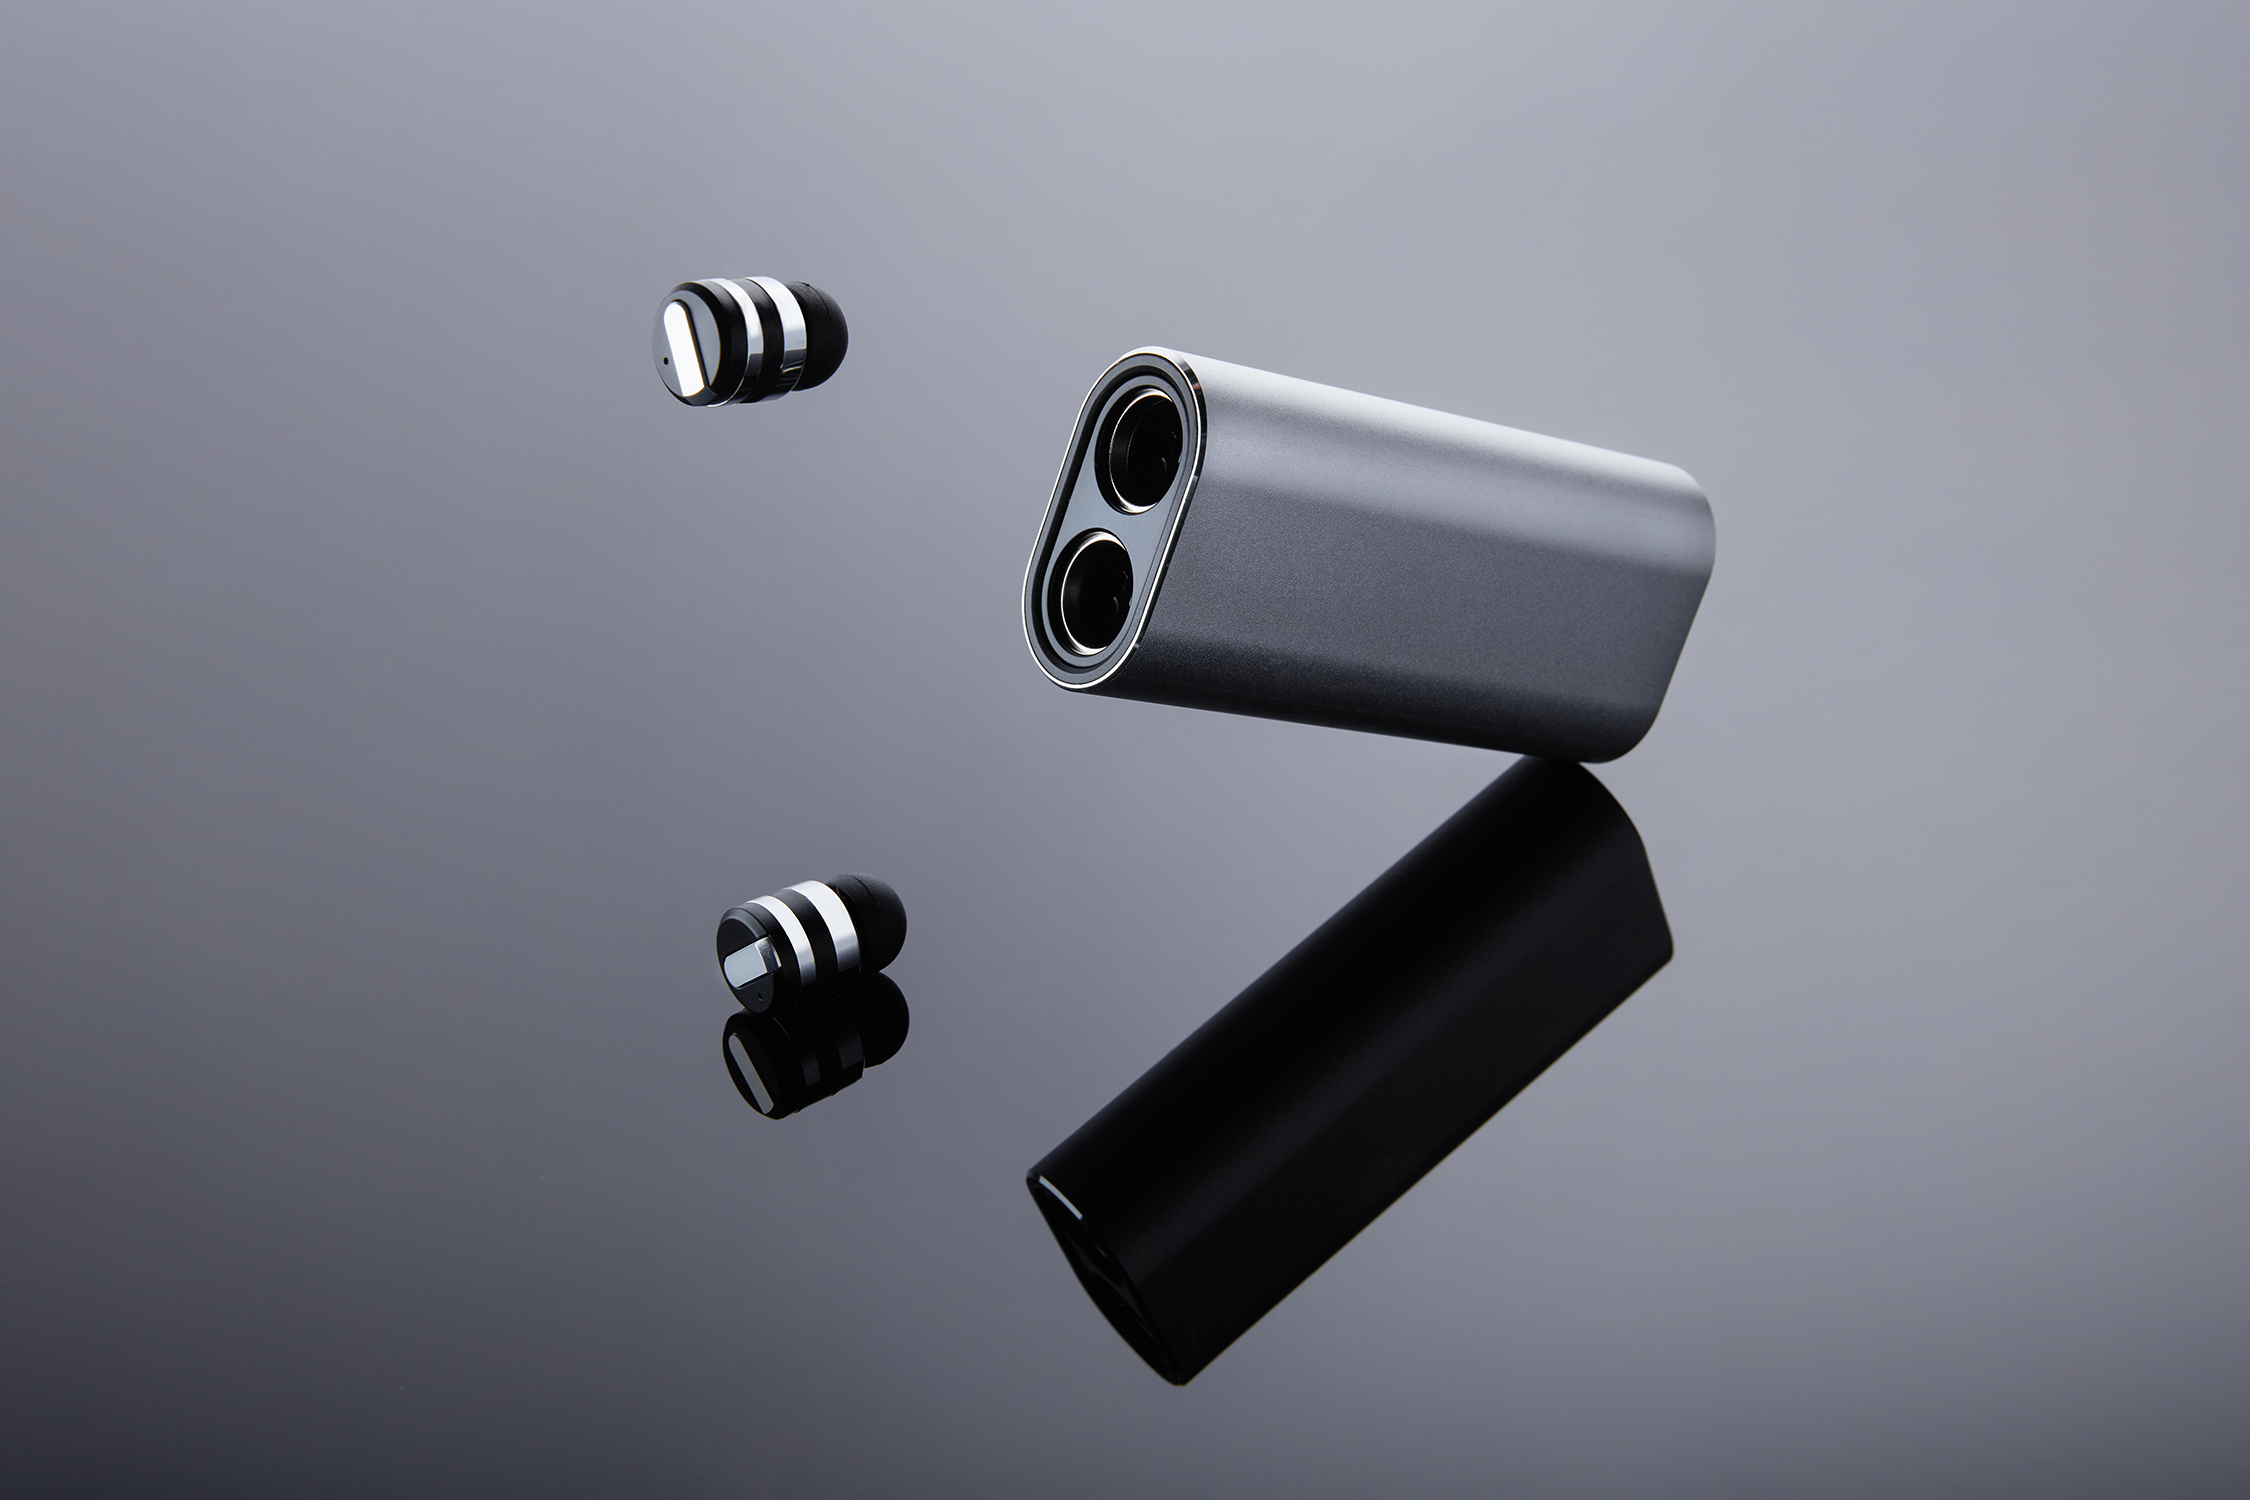 BULLET2.0 STEREO EARBUDS + HIGH CAPACITY 2100mAh CHARGING CASE